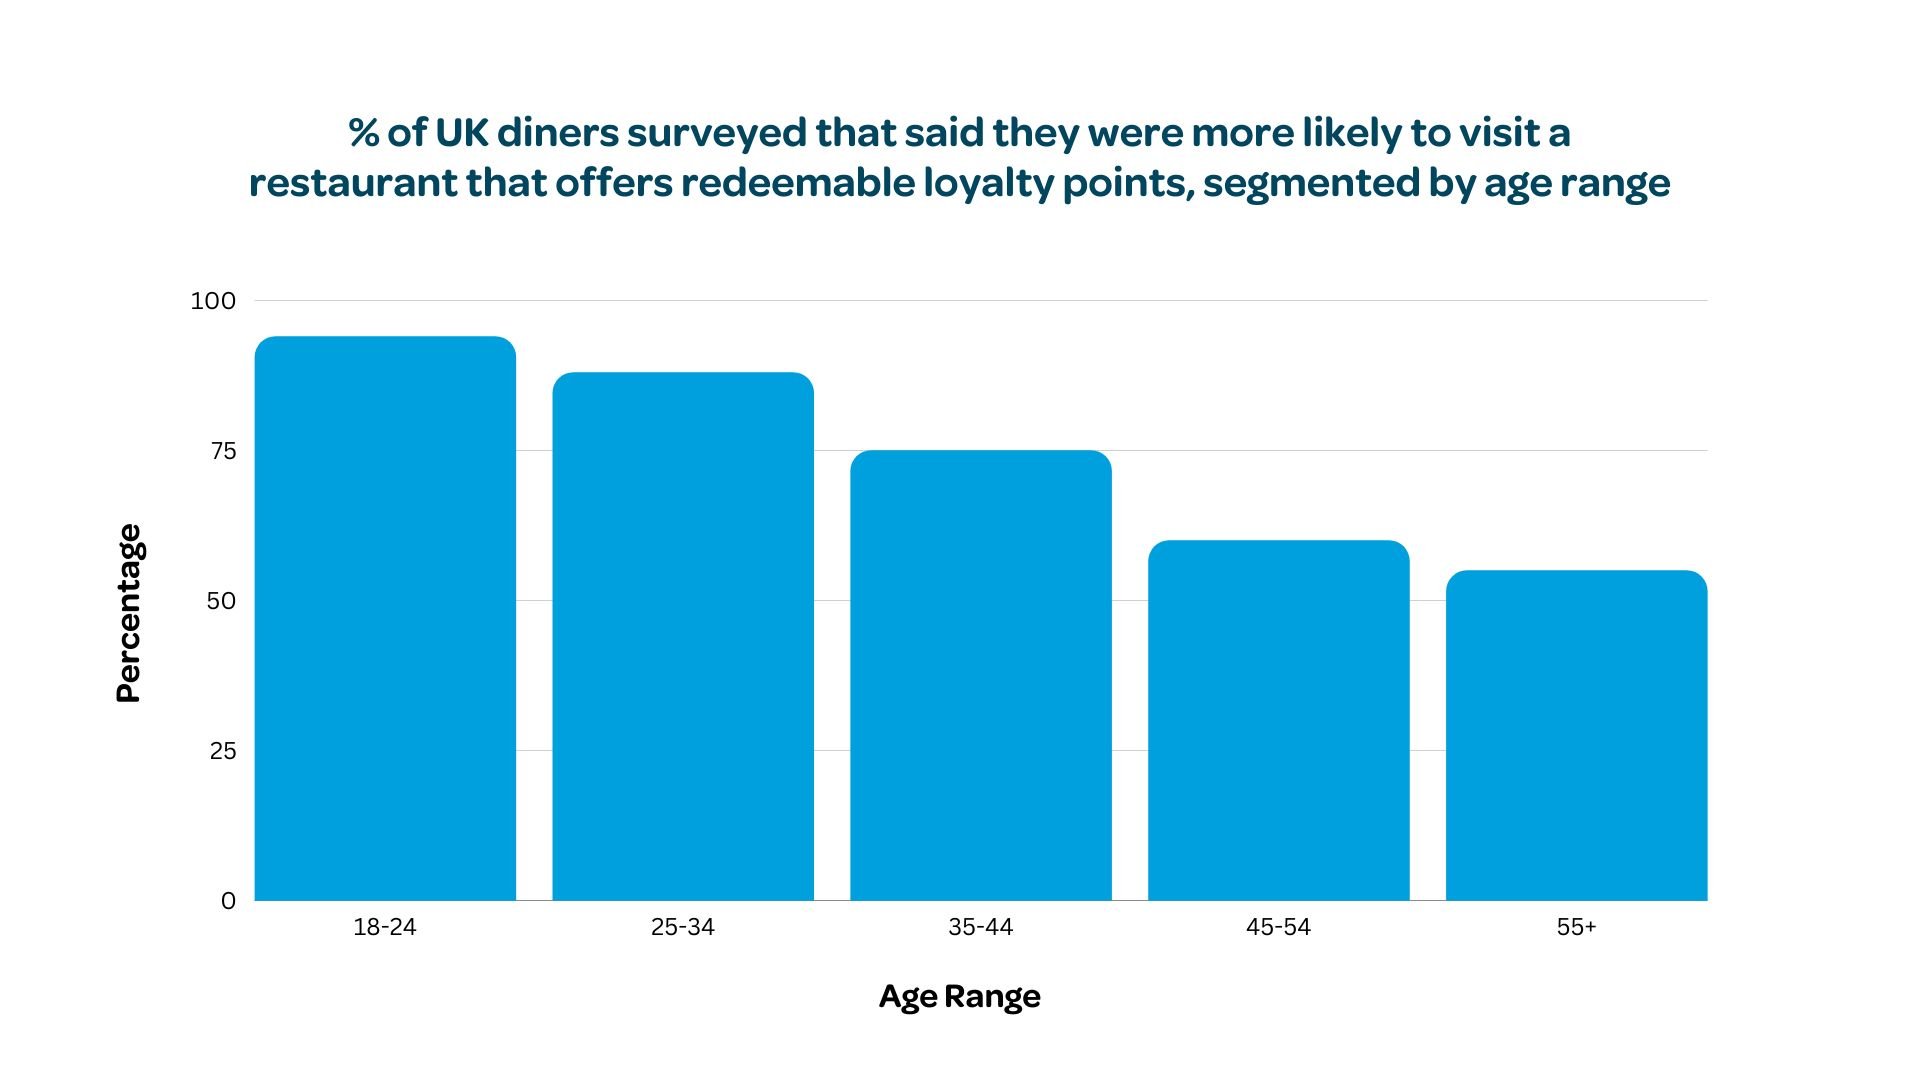 Bar graph showing % of UK diners surveyed that said they were more likely to visit a restaurant that offers redeemable loyalty points, segmented by age range